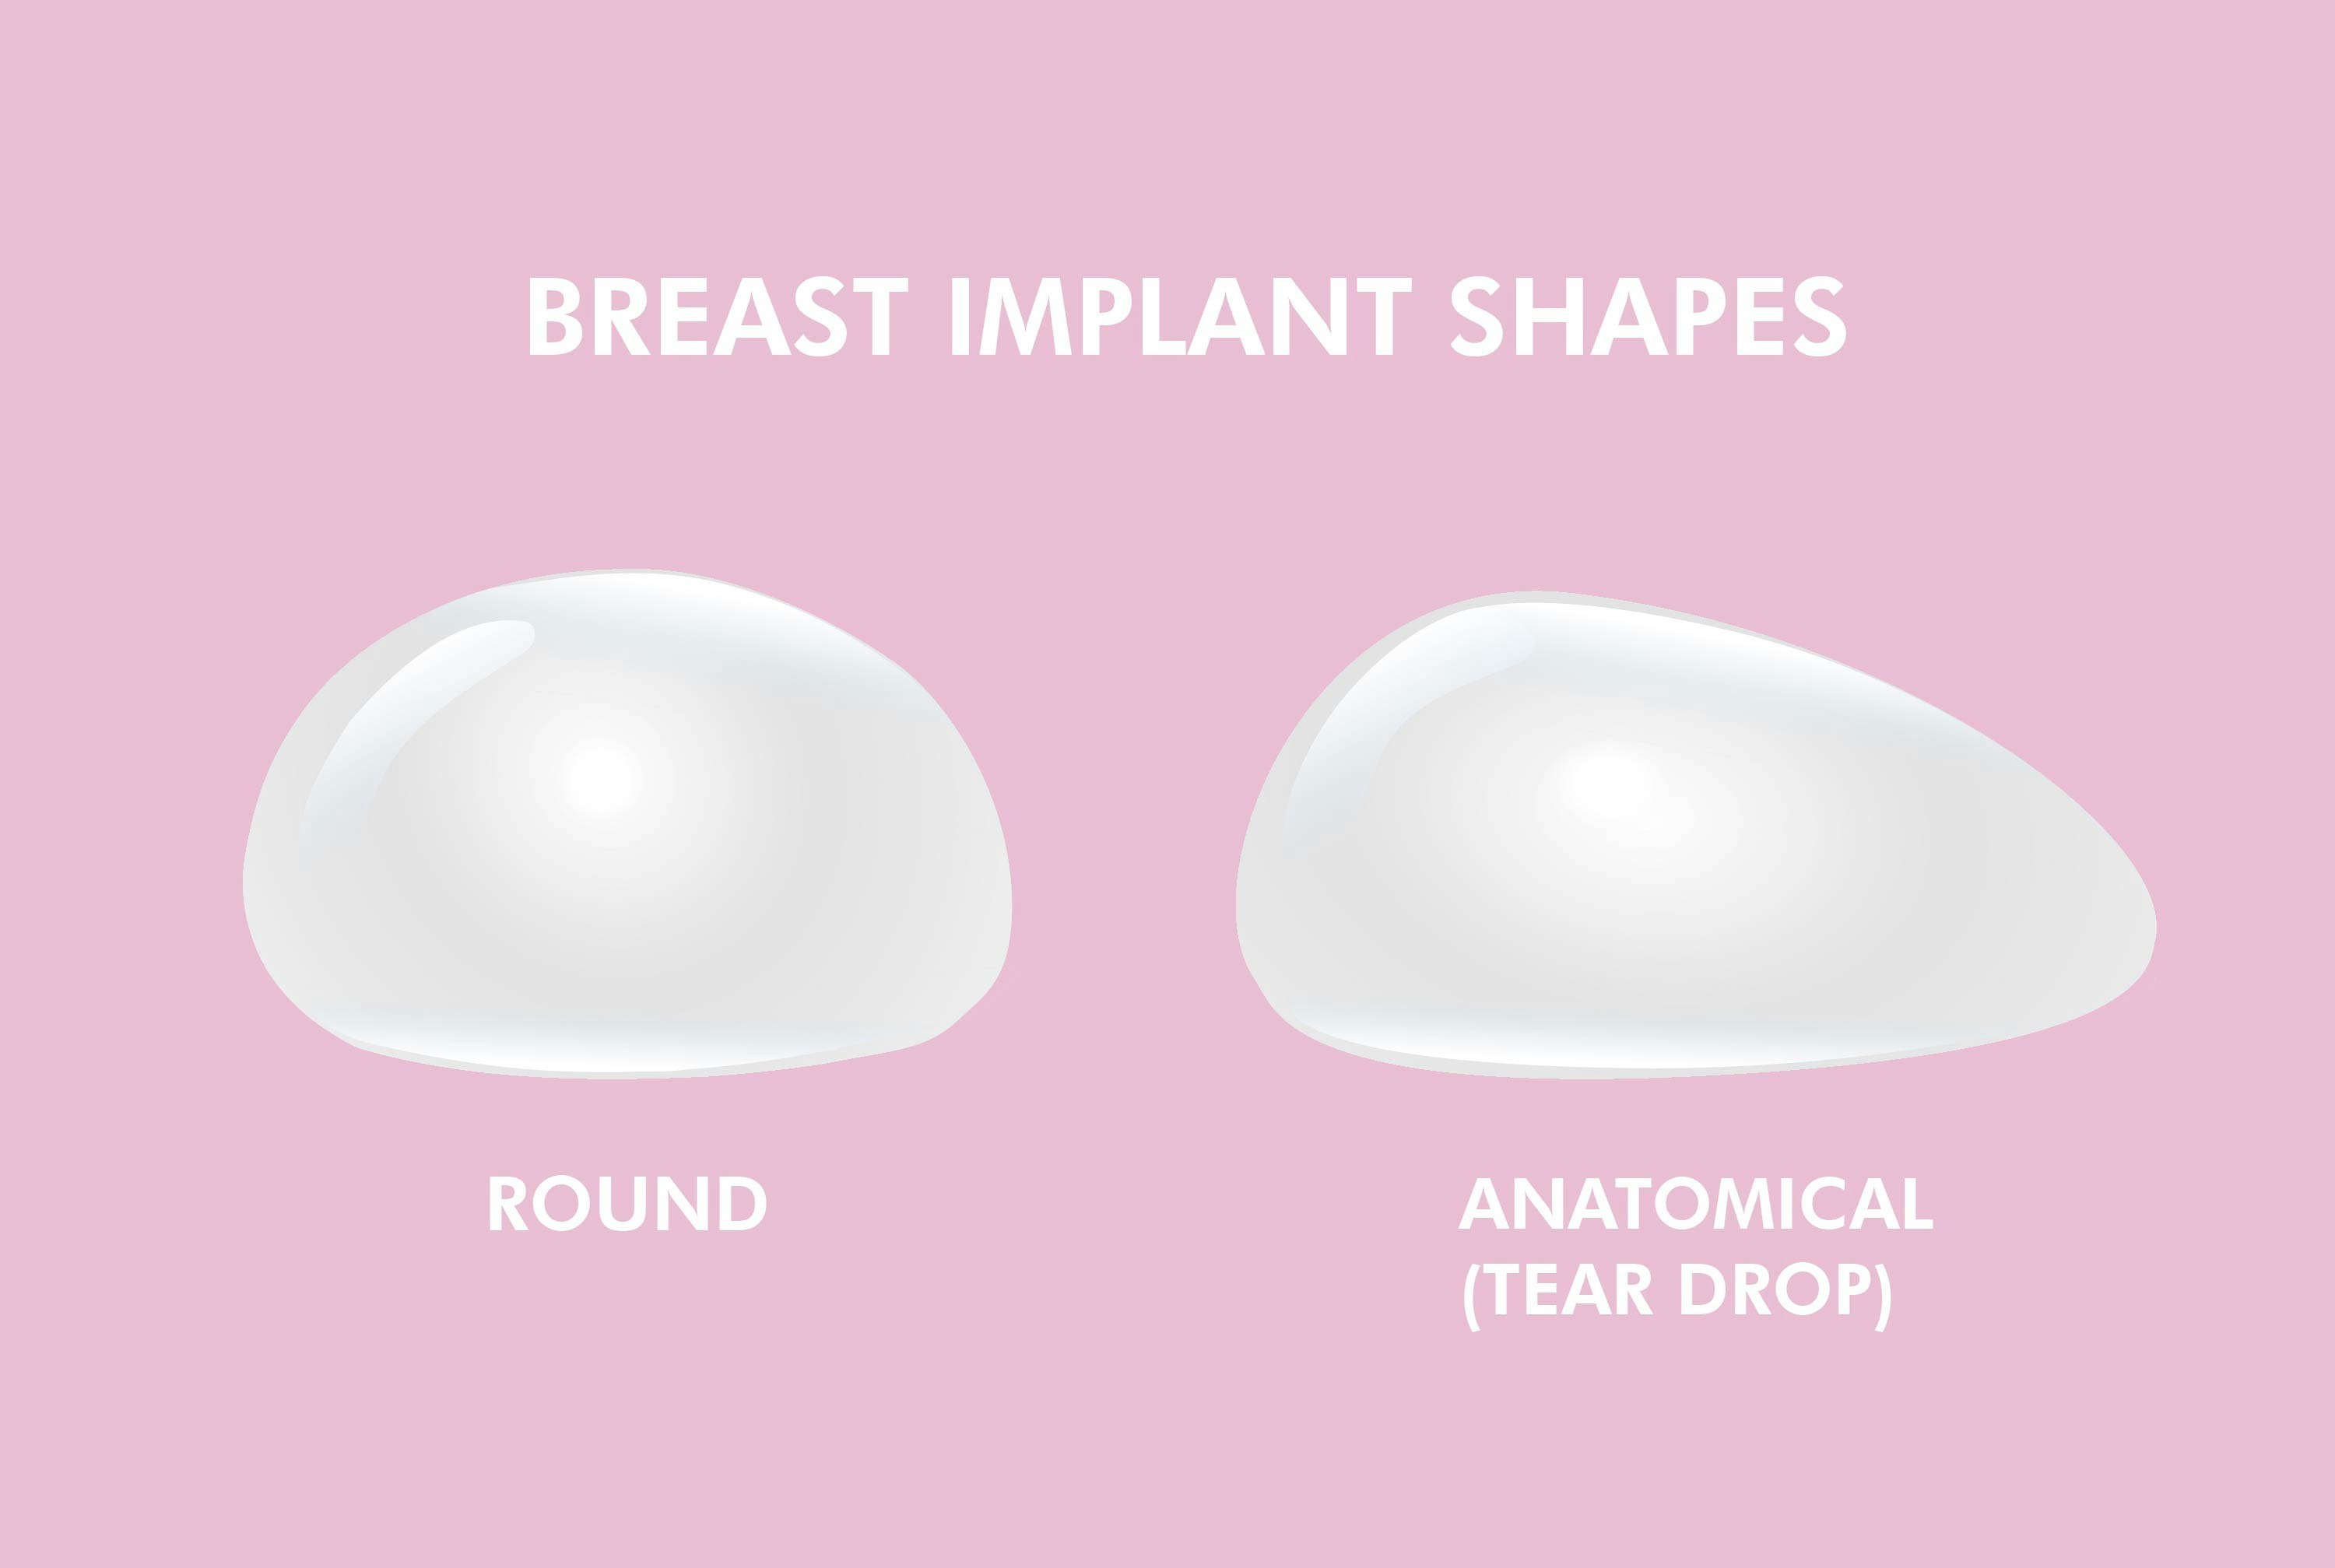 Breast Implant Shapes